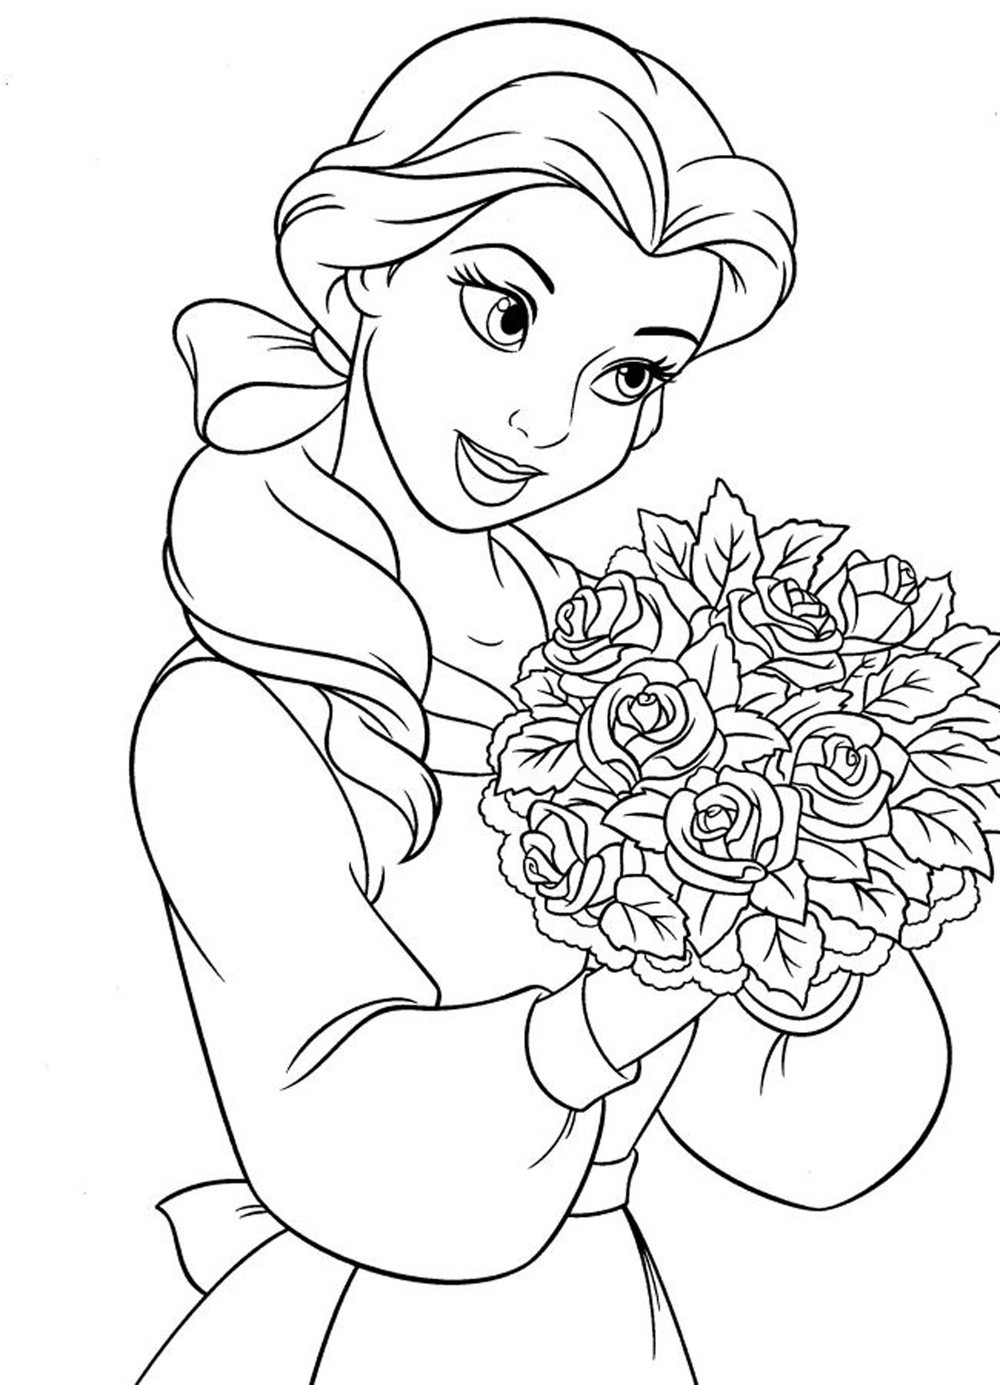 Disney Coloring Pages For Kids
 Disney Princess Tiana Coloring Page Disney